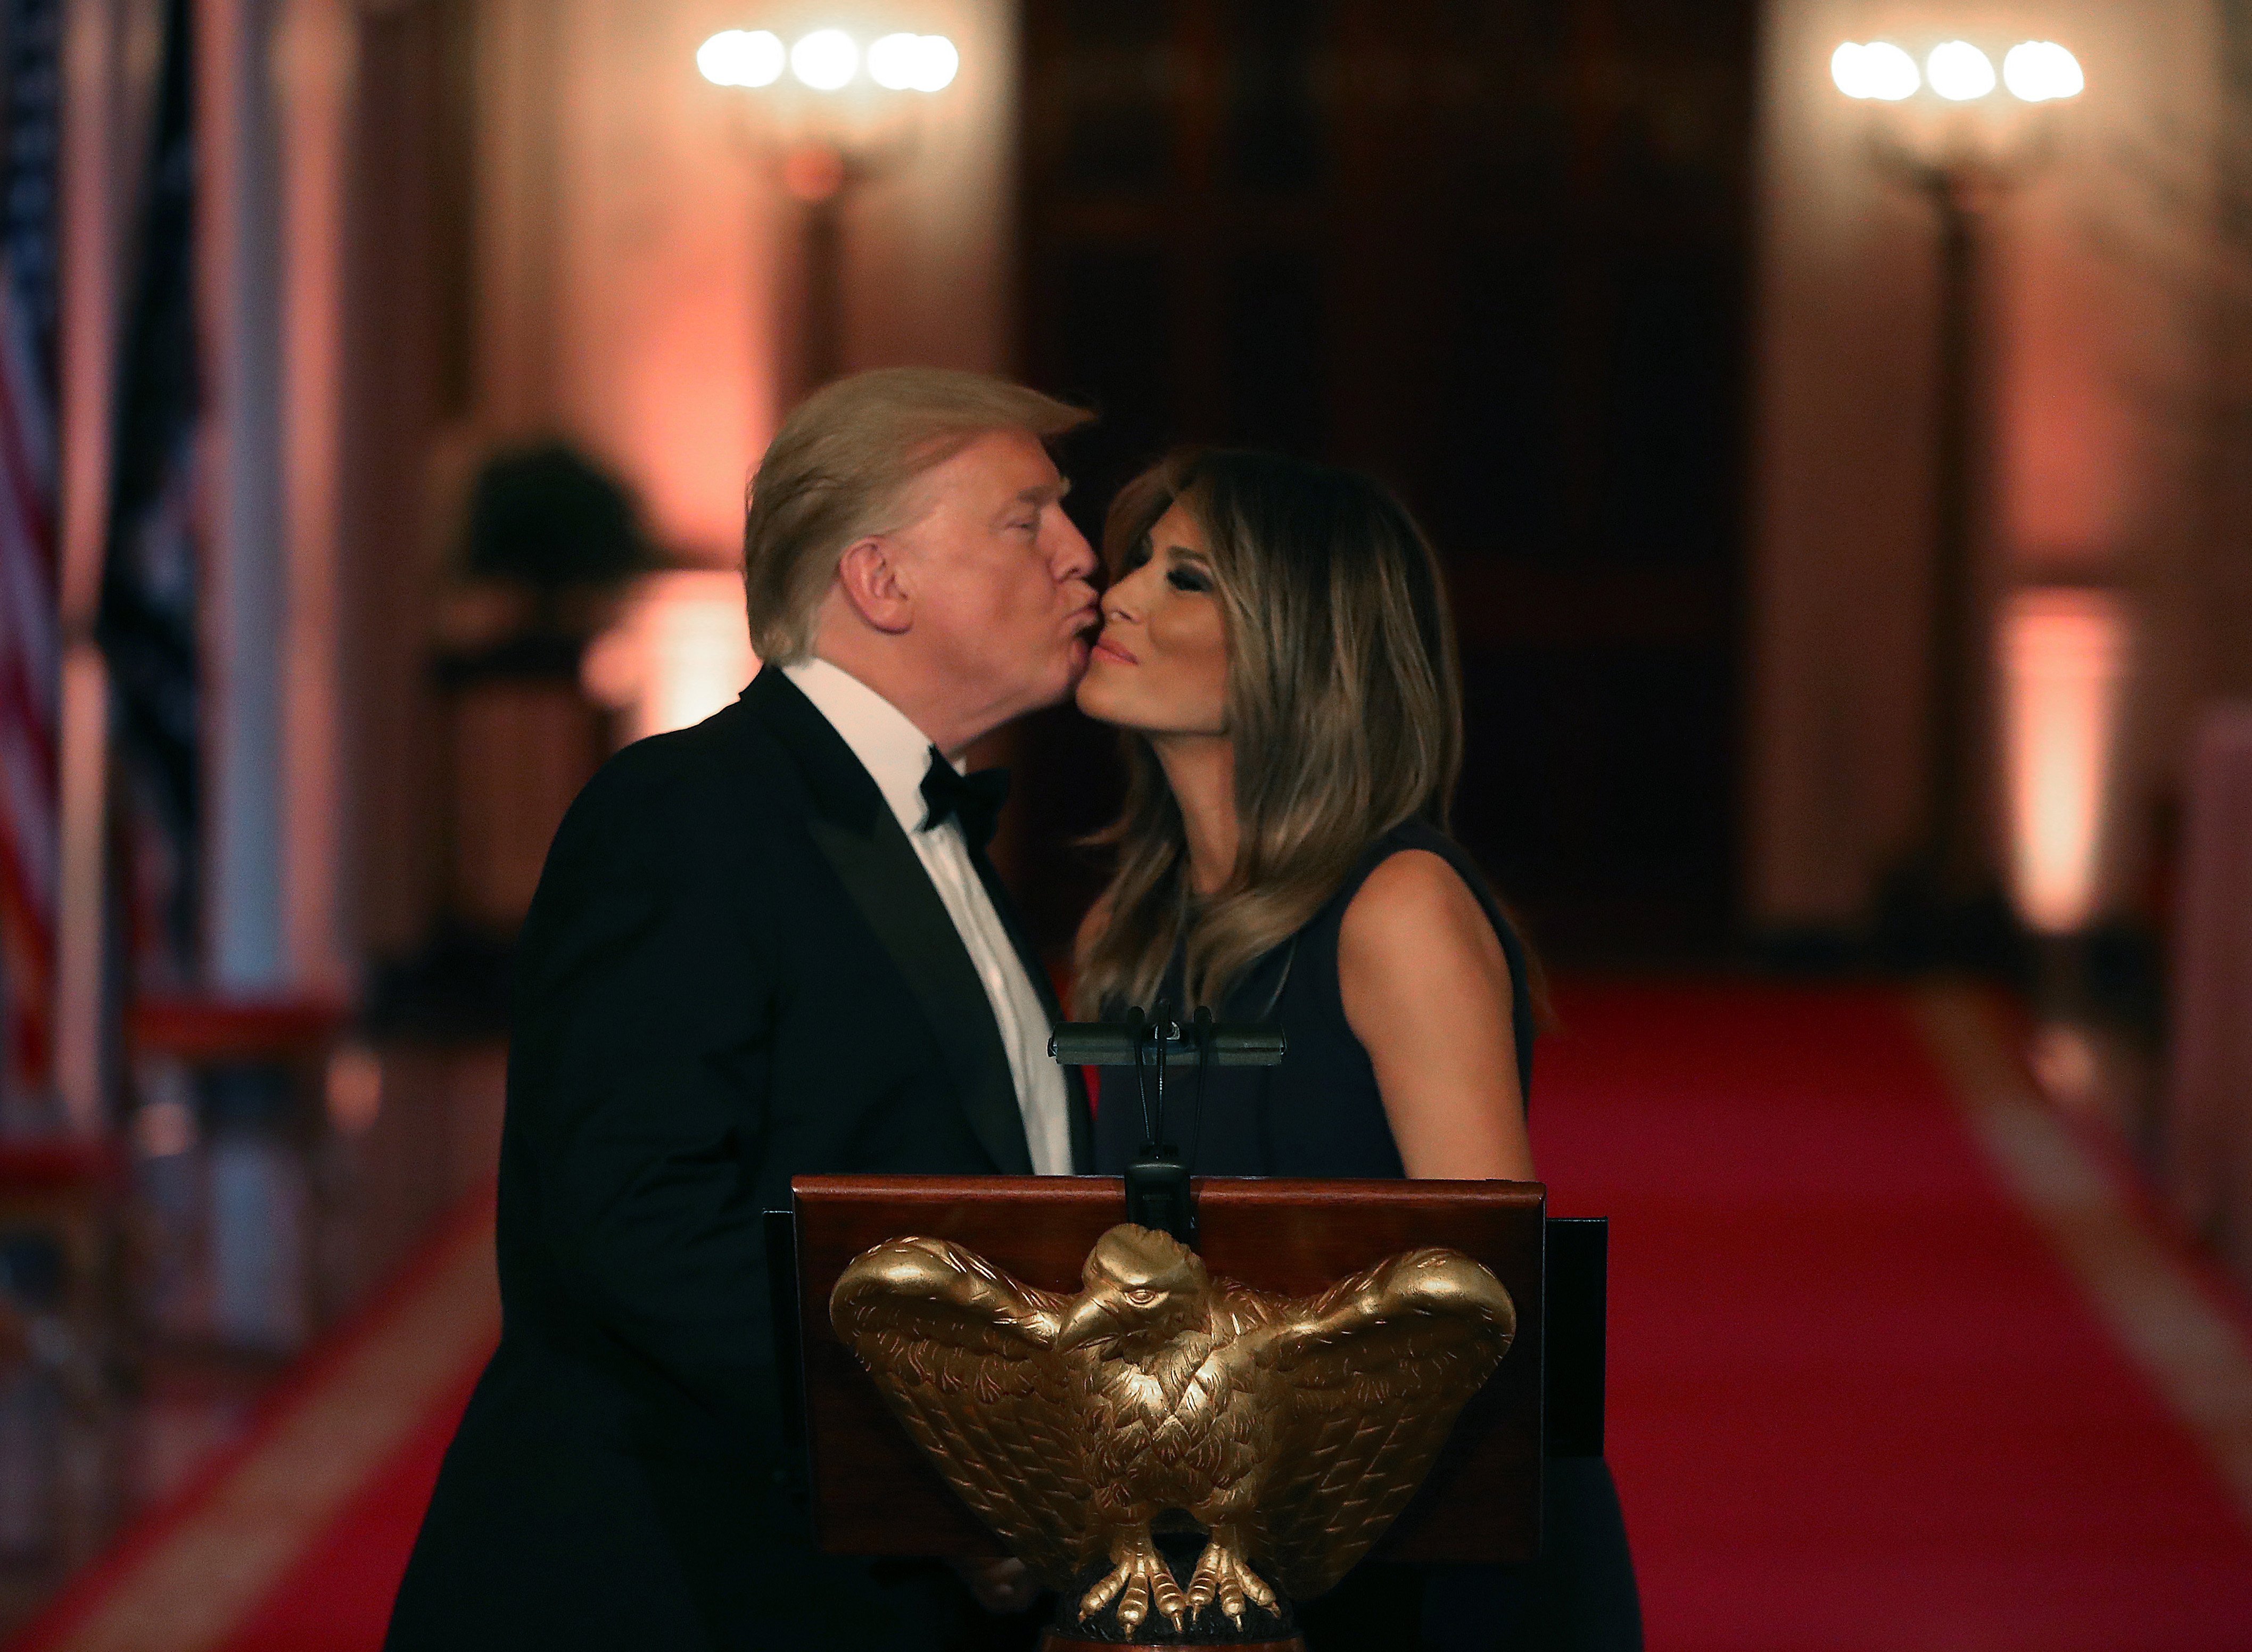 President Donald Trump and First Lady Melania Trump U.S. President Donald Trump and first lady Melania Trump at the White House Historical Association Dinner | Photo: Getty Images